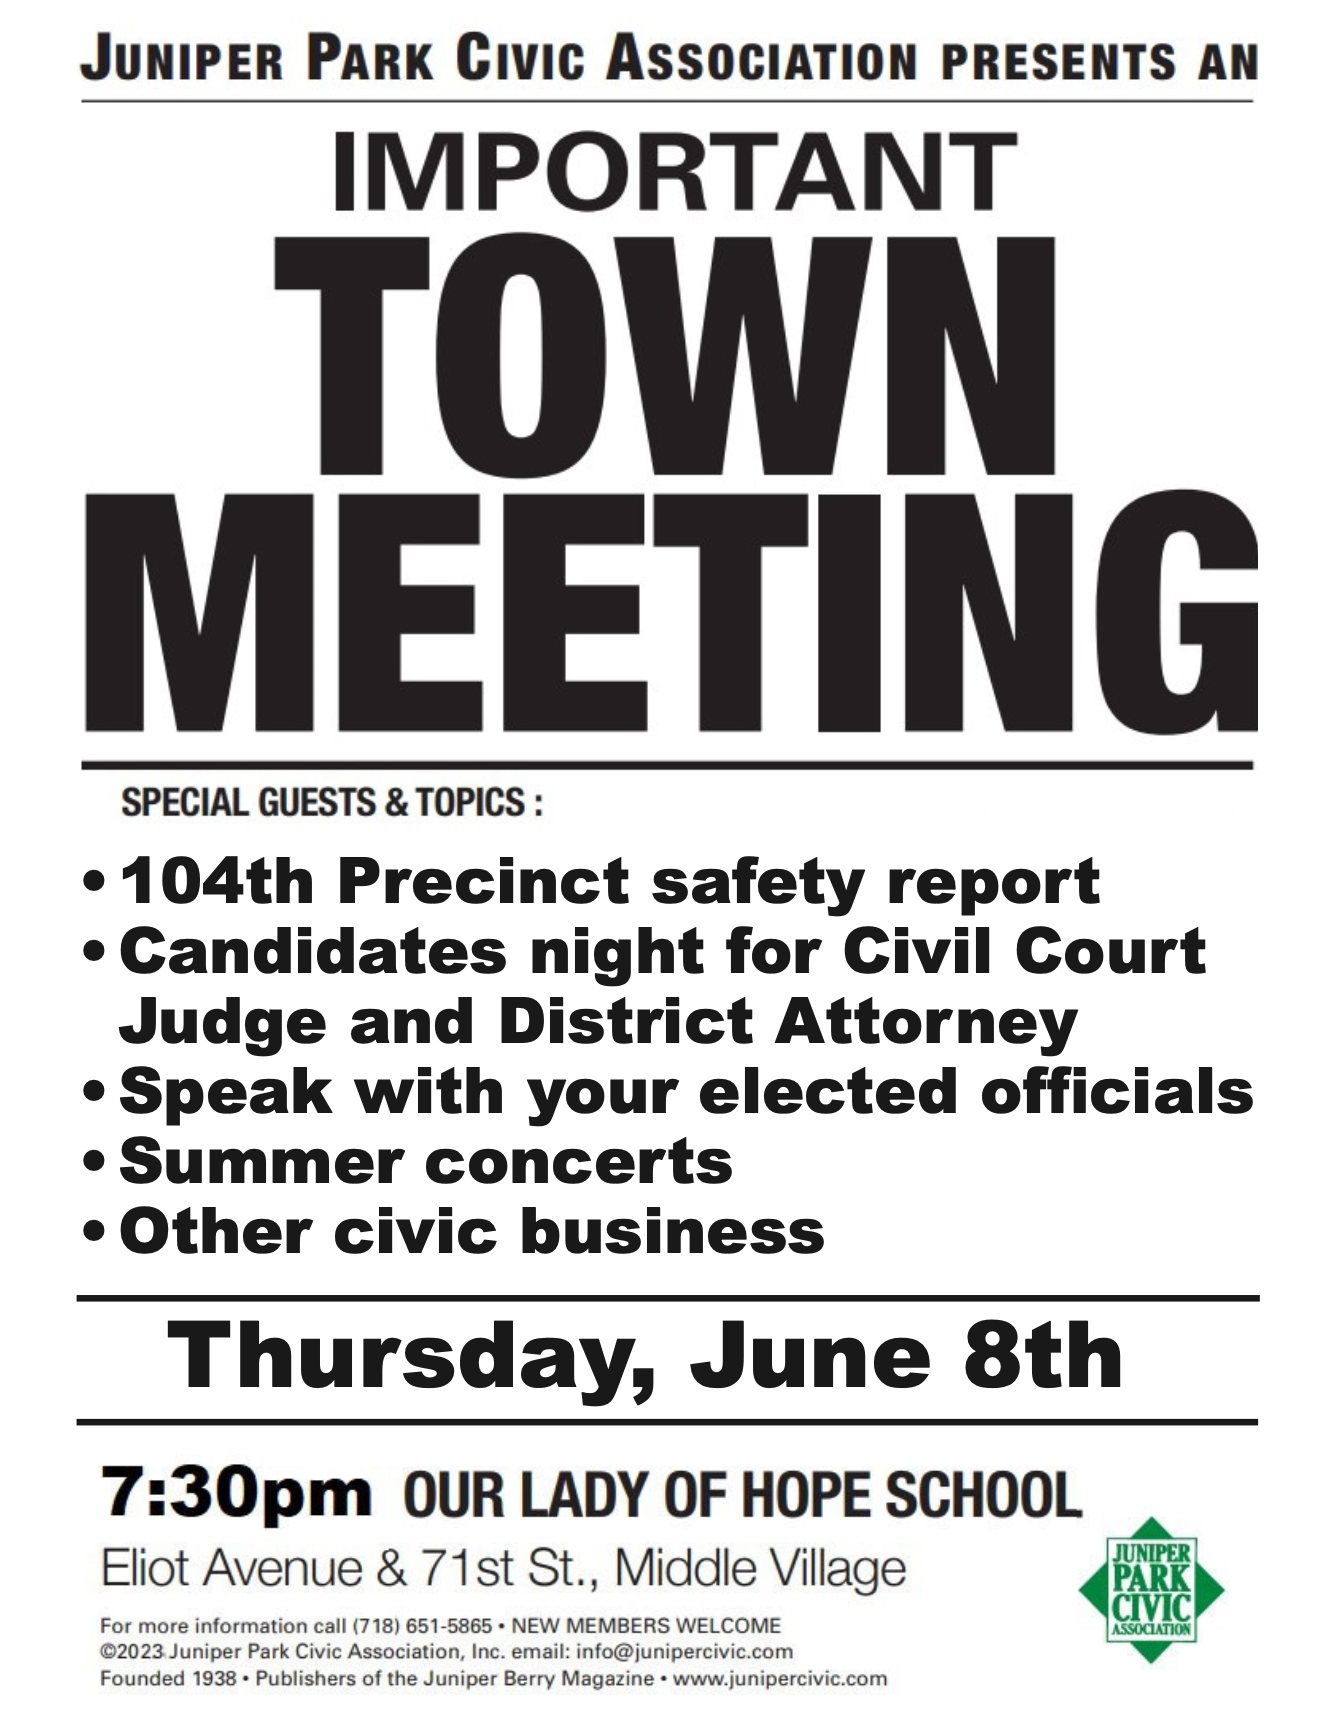 June 2023 Town Meeting takes place June 8th at OLH